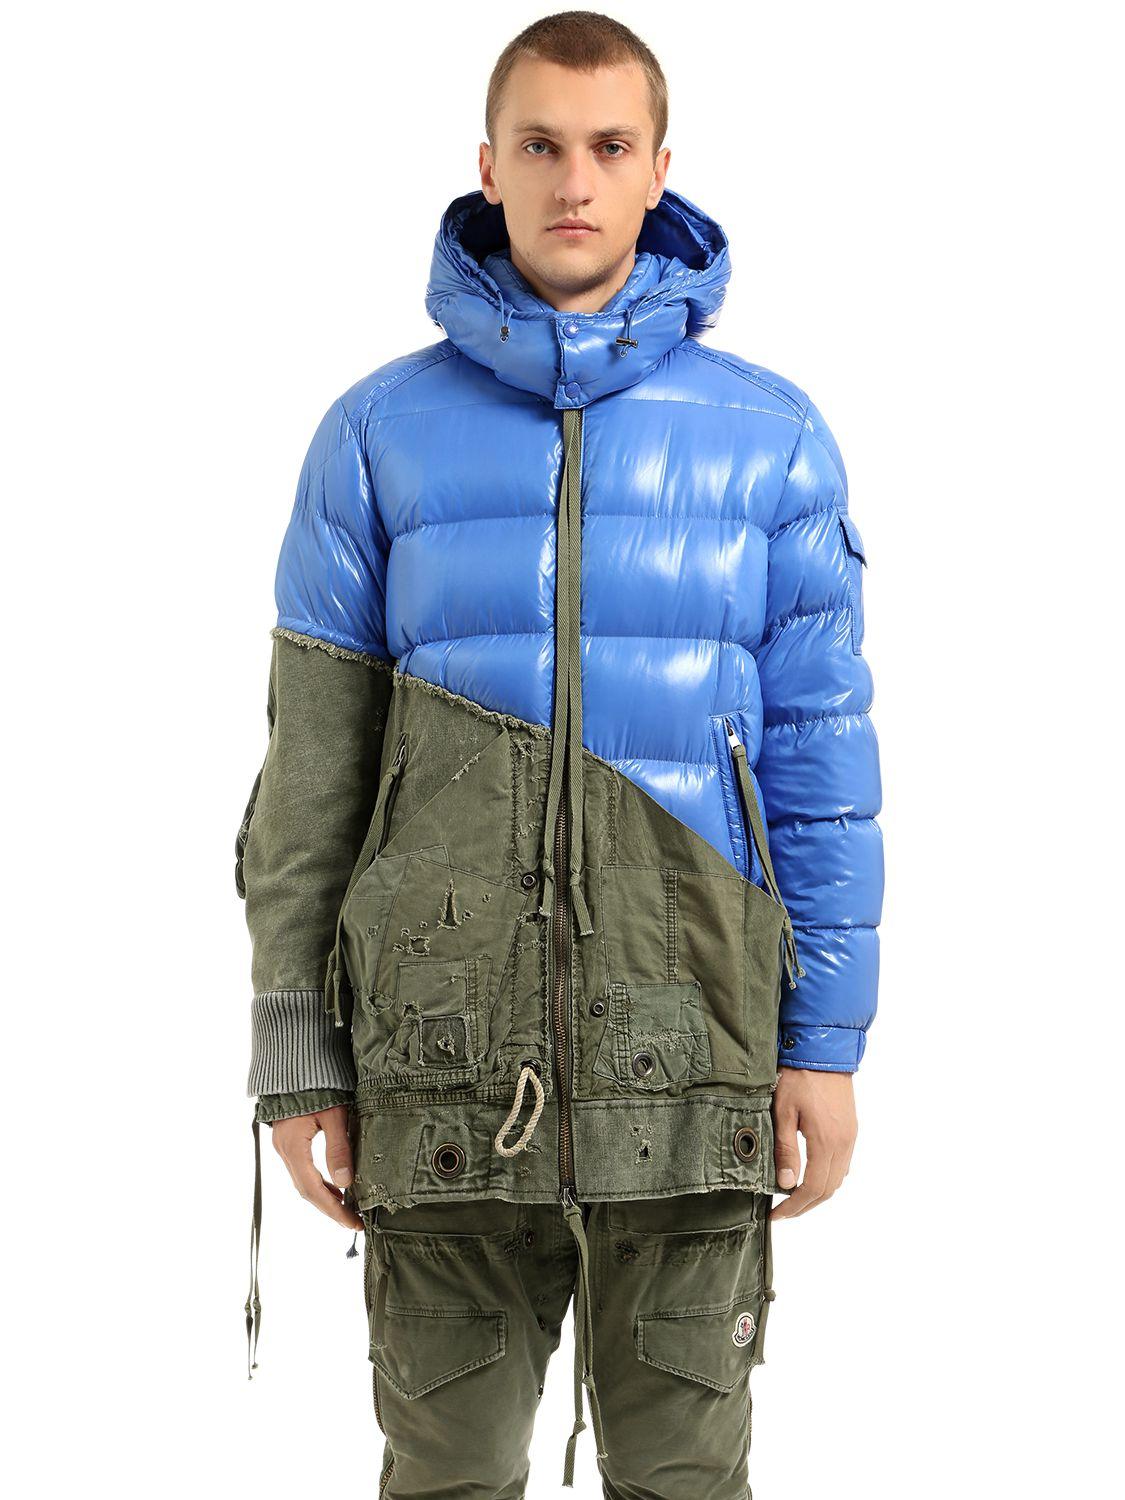 Moncler Synthetic Greg Lauren Collide Maya Down Jacket in Blue/Army ...